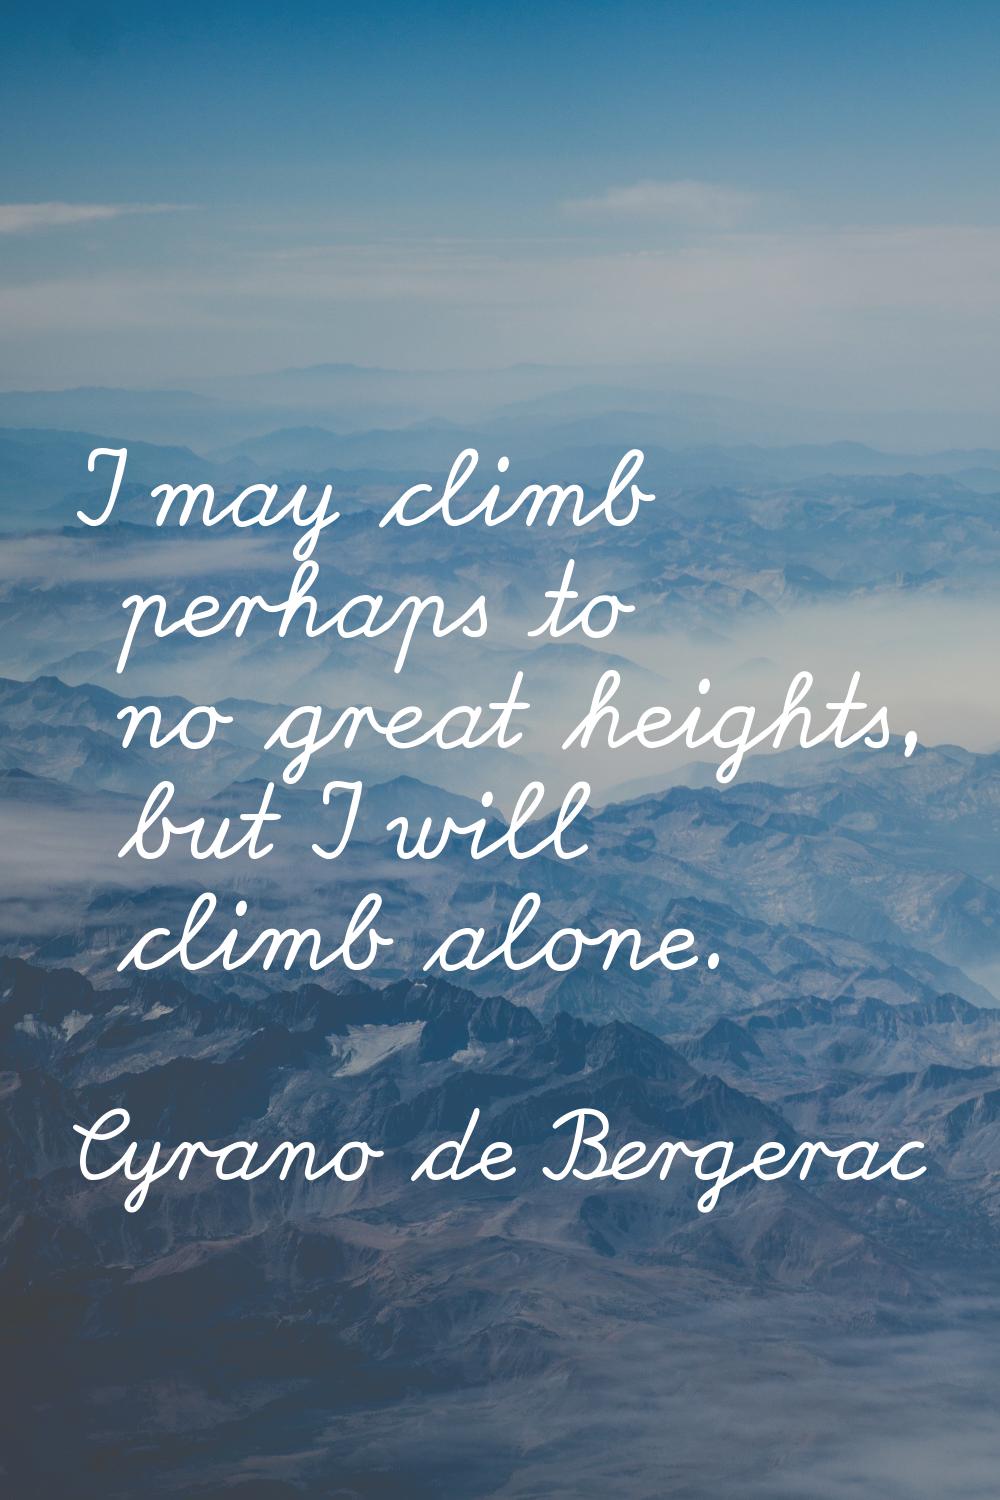 I may climb perhaps to no great heights, but I will climb alone.